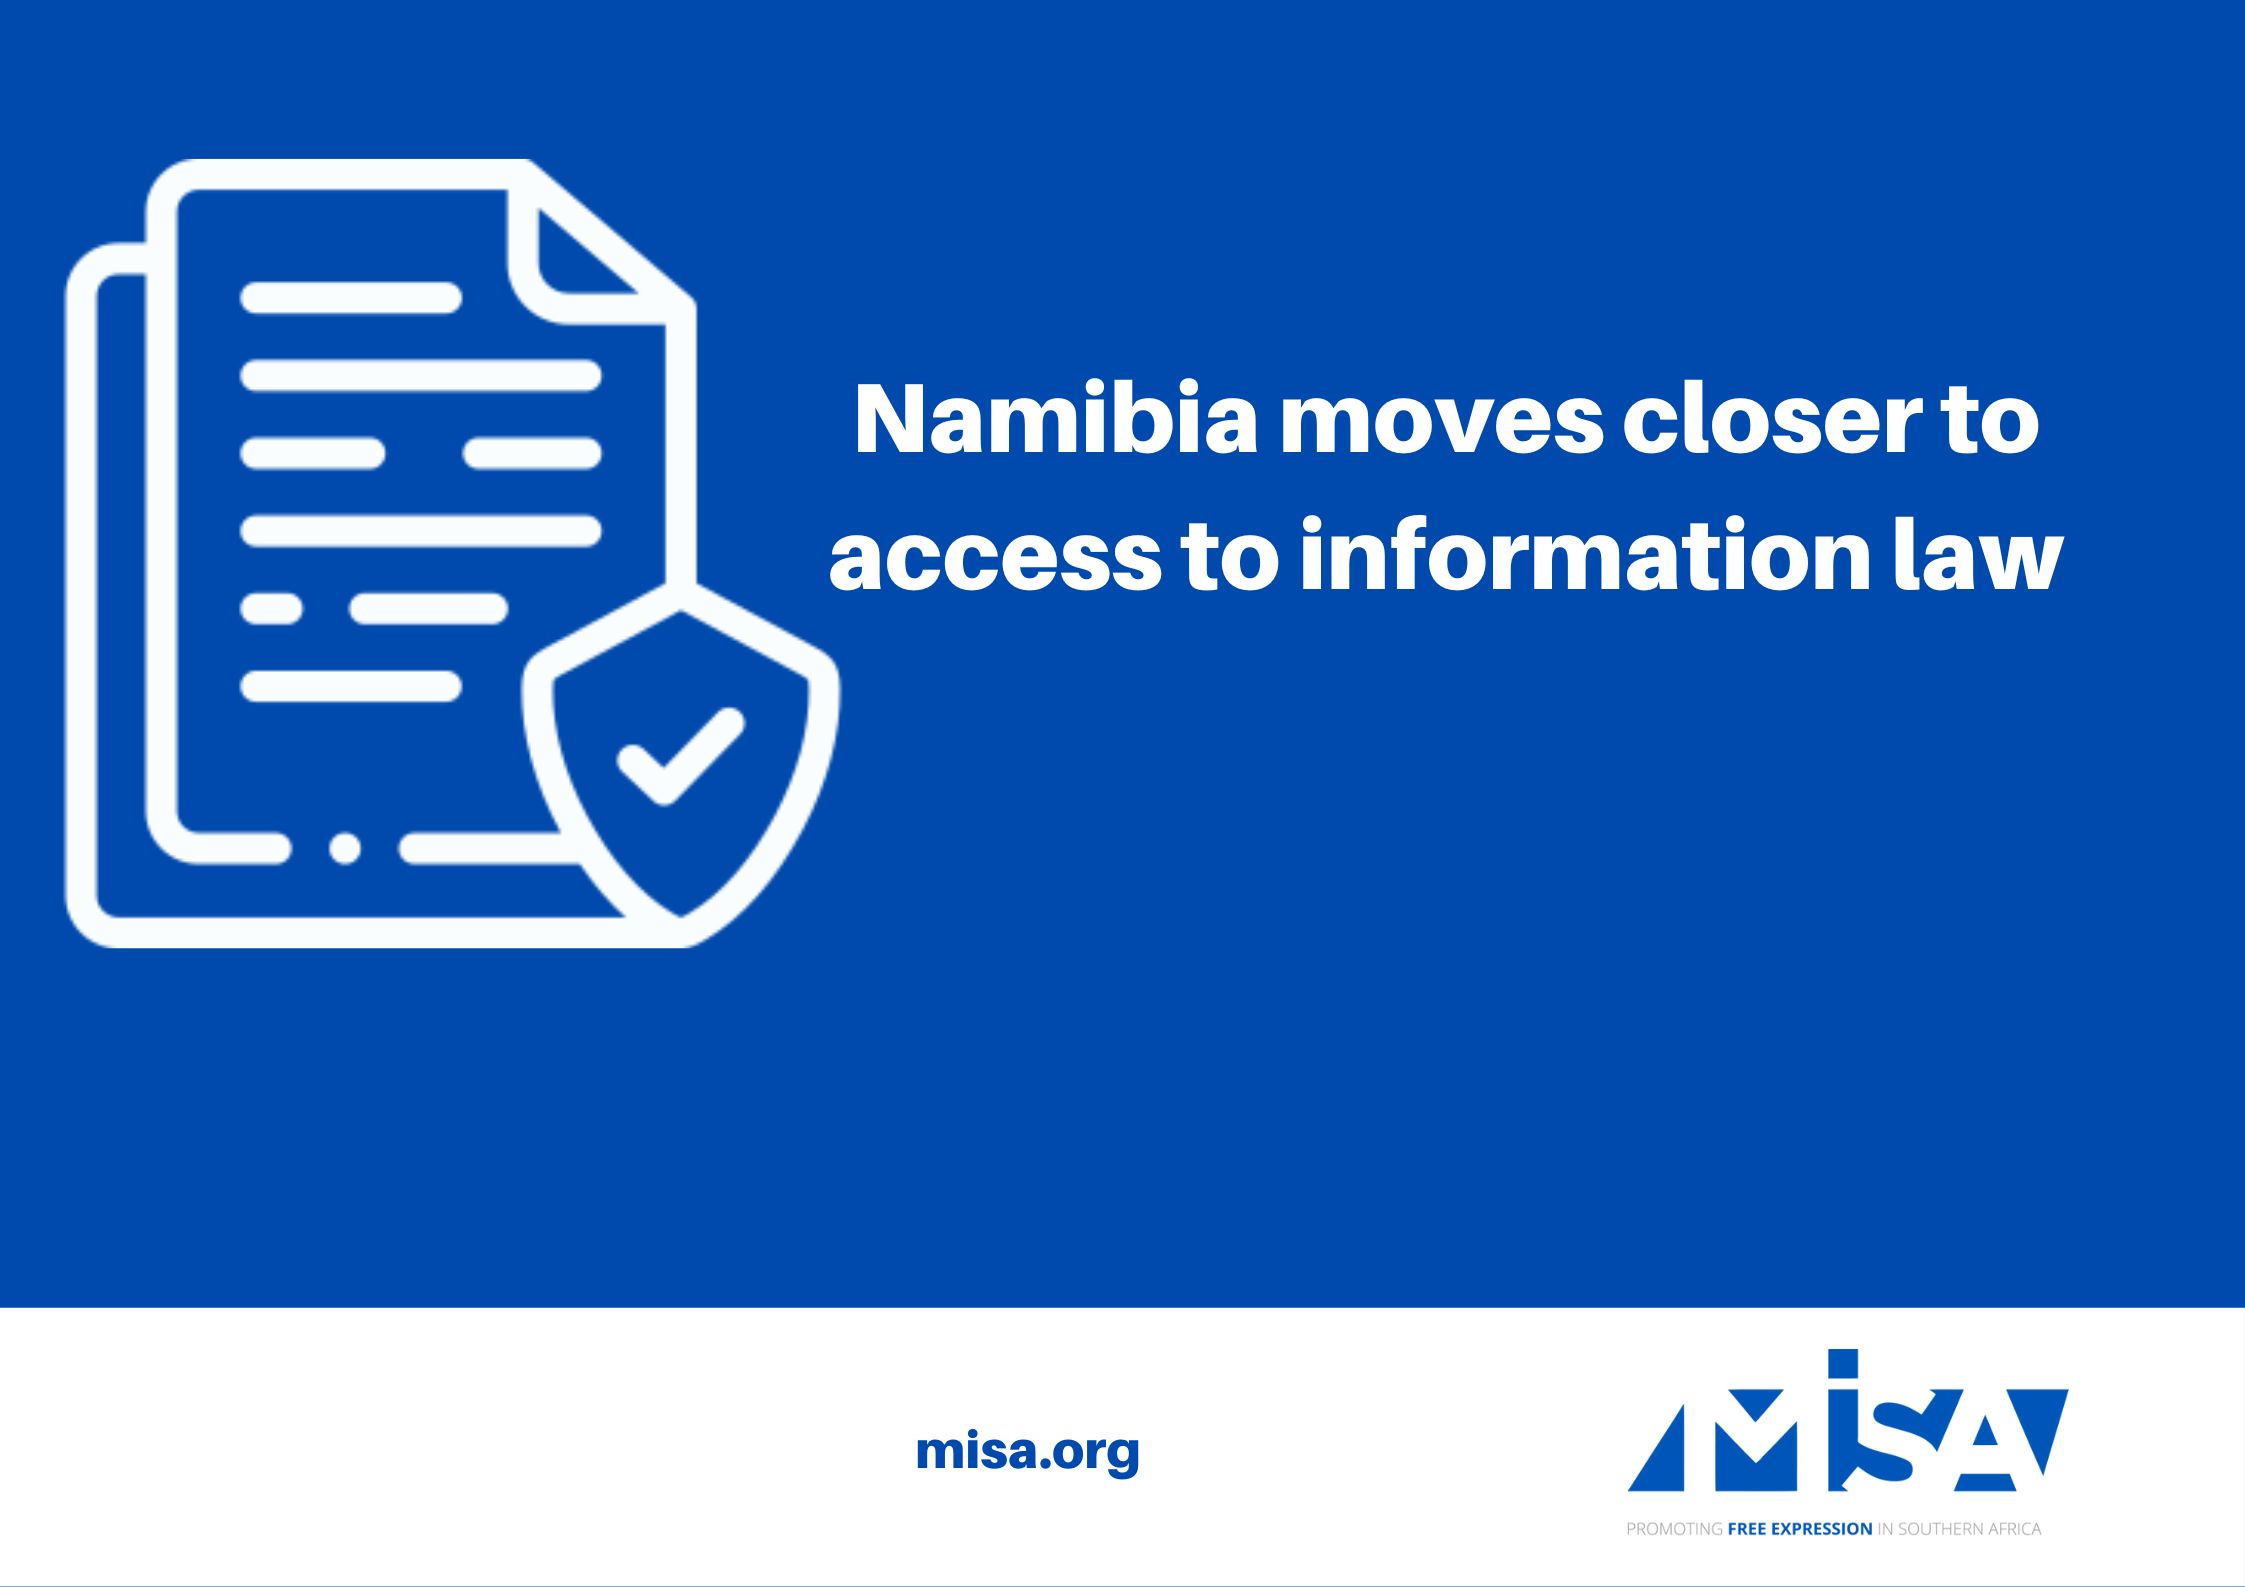 Namibia moves closer to access to information law